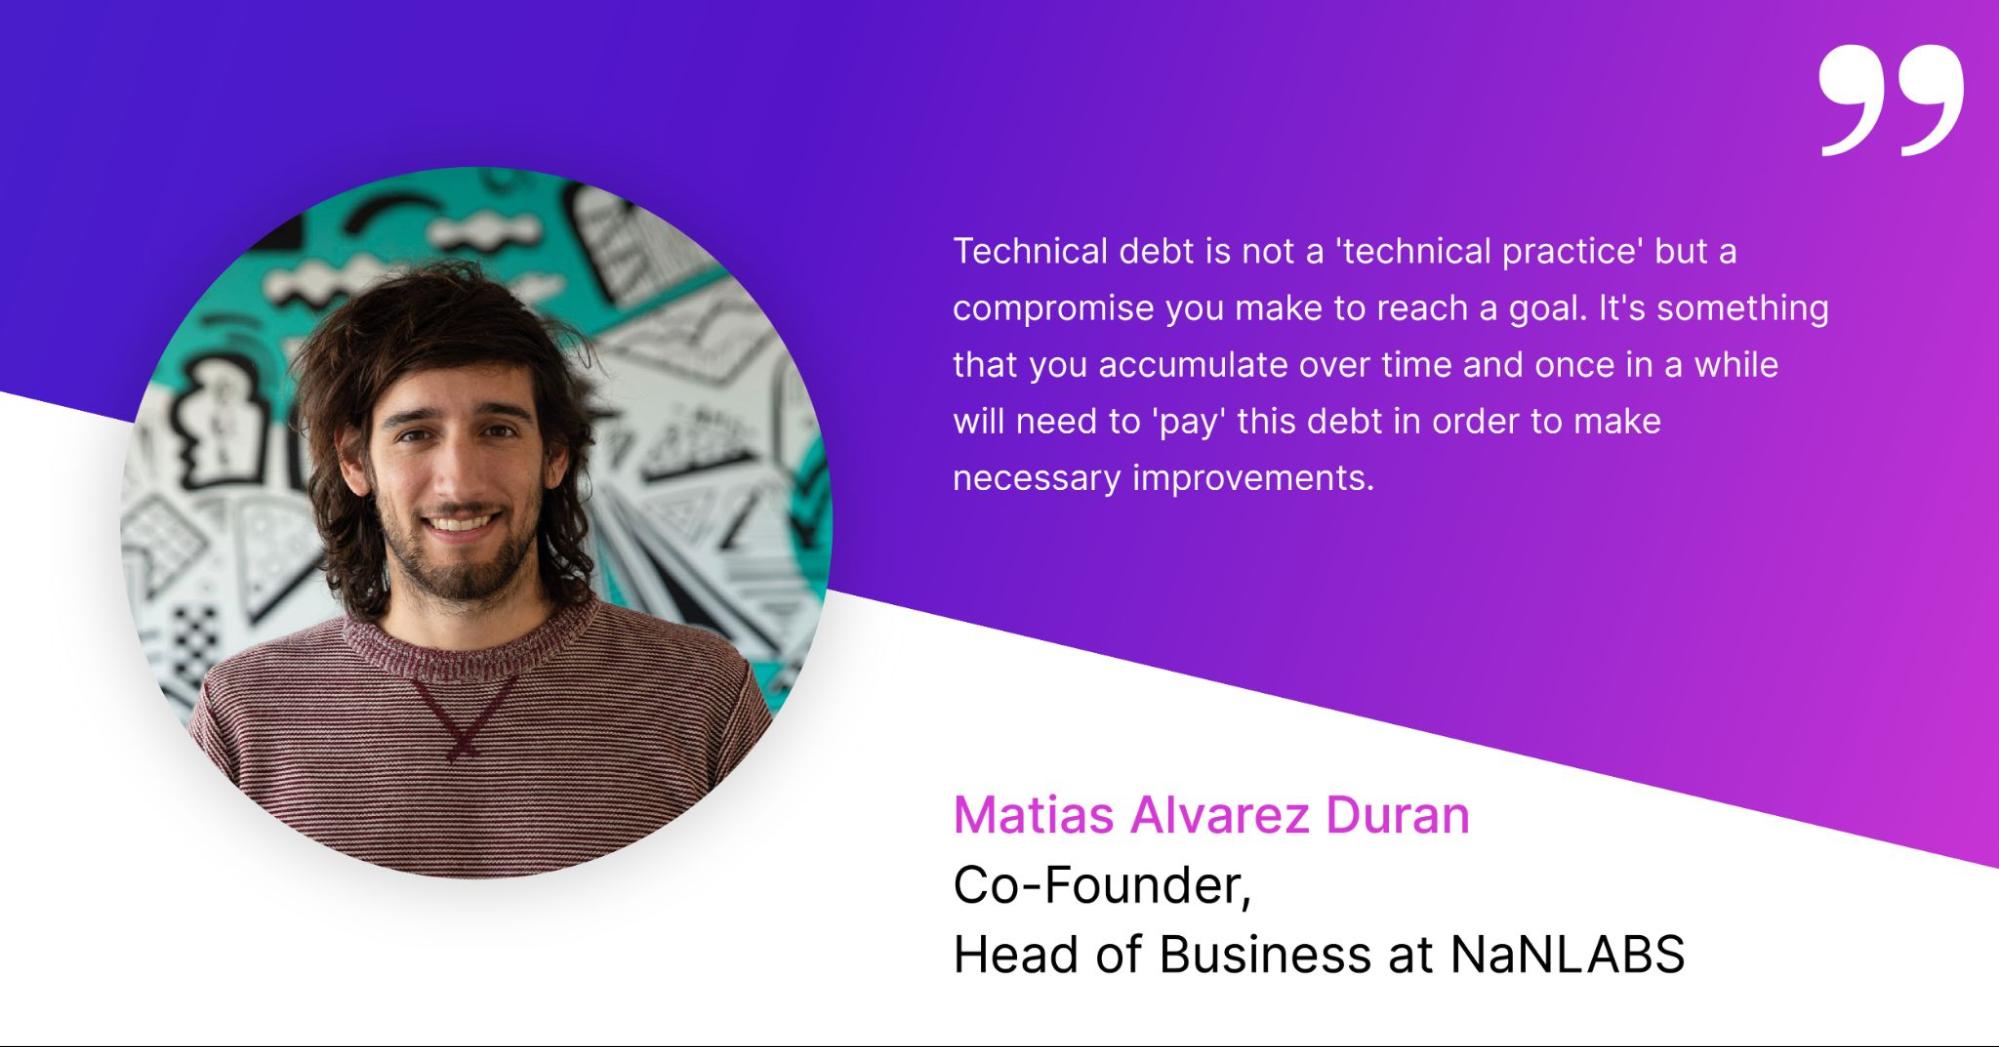 Guide to Agile technical practices - quote from Matias Alvarez Duran, Co-Founder of NaNLABS, about technical debt